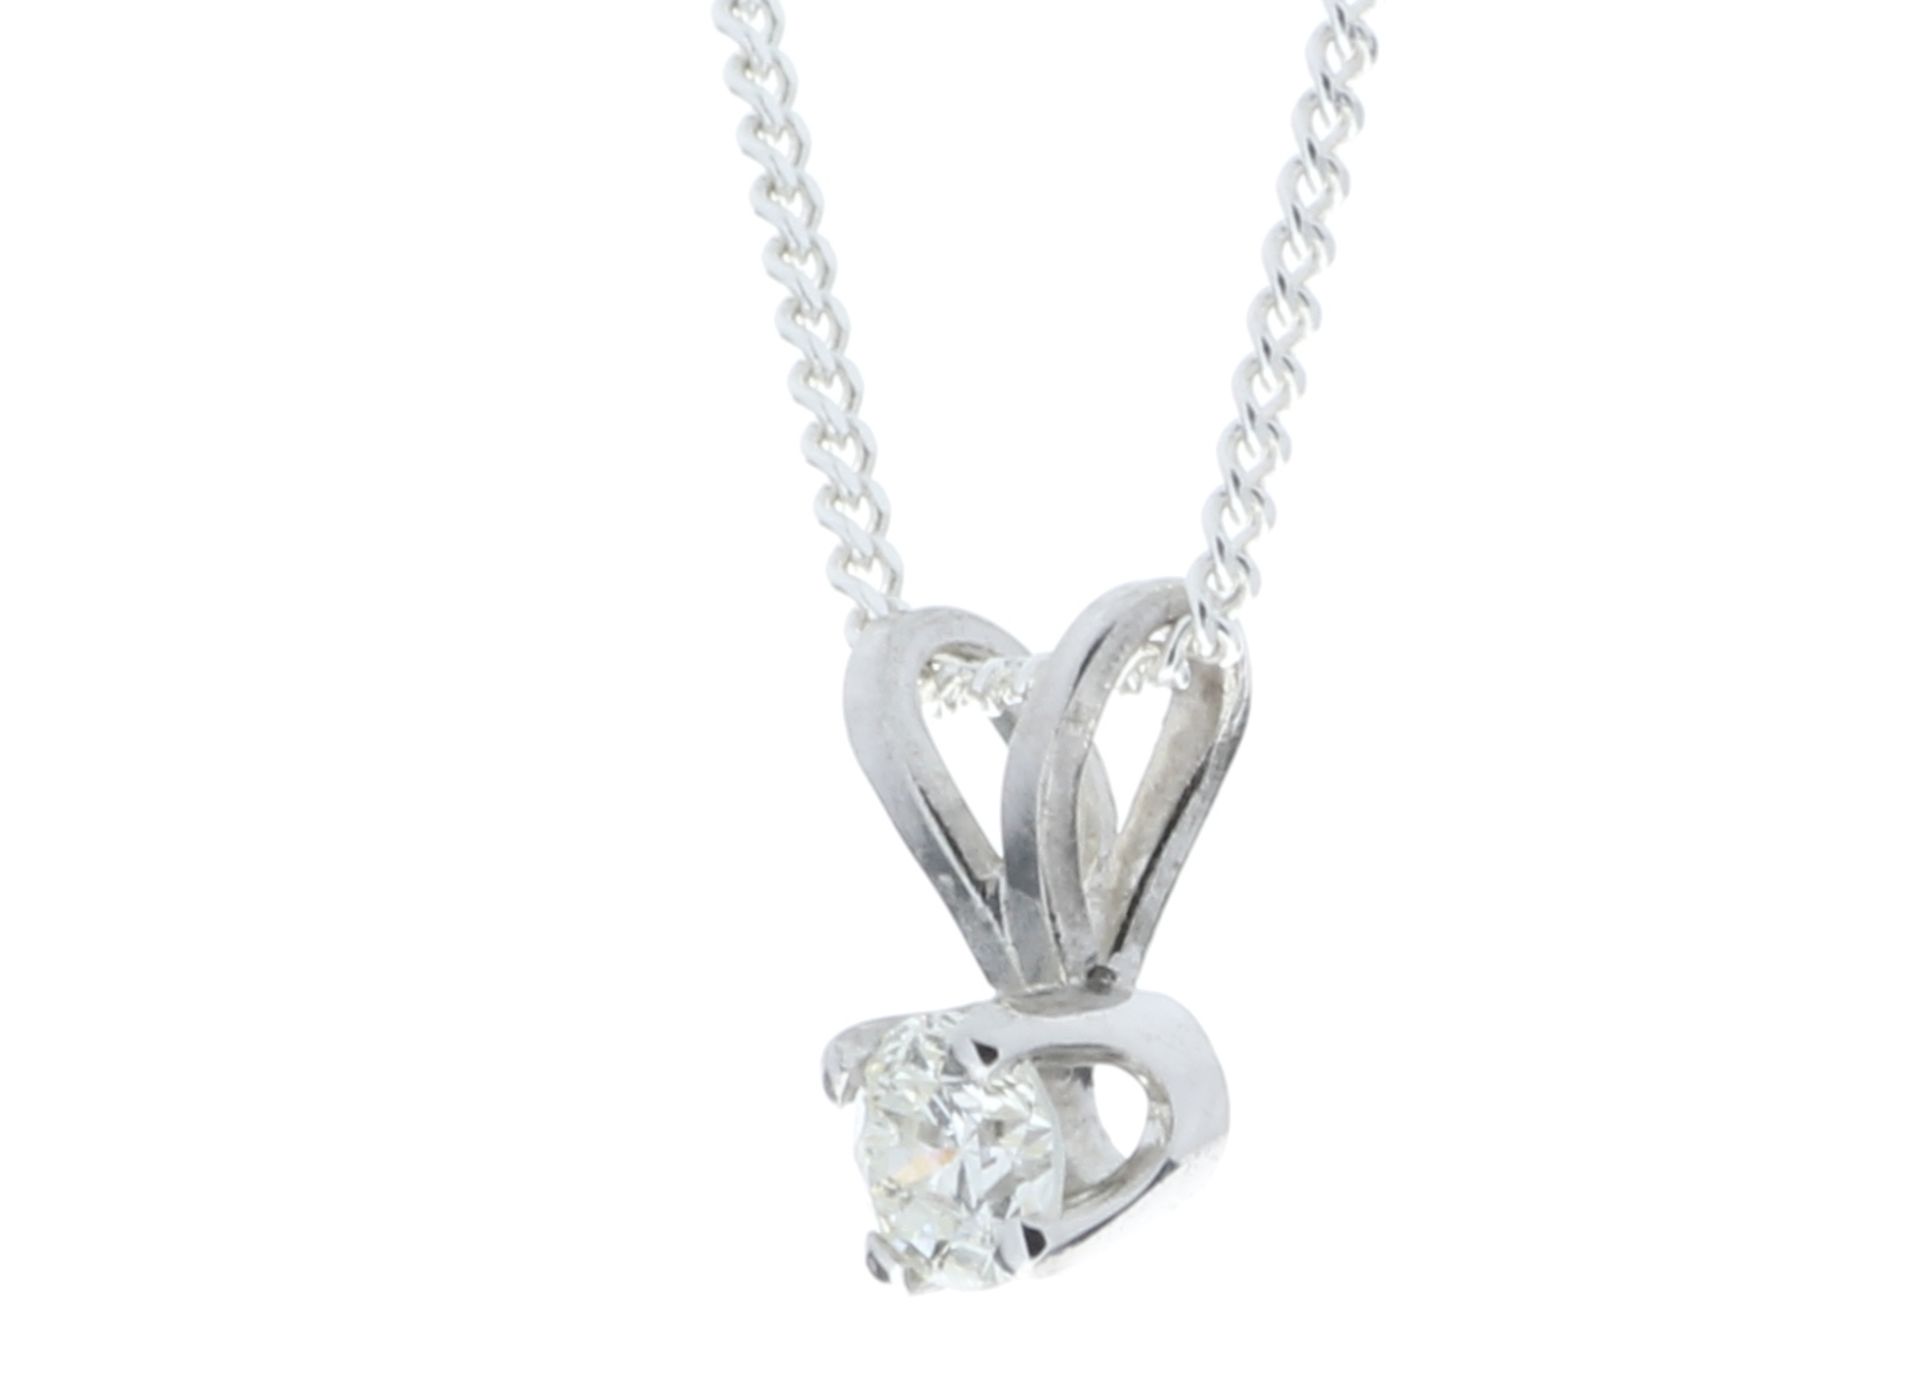 9ct White Gold Single Stone Claw Set Diamond Pendant 0.10 Carats - Valued by GIE £1,611.00 - A - Image 4 of 6